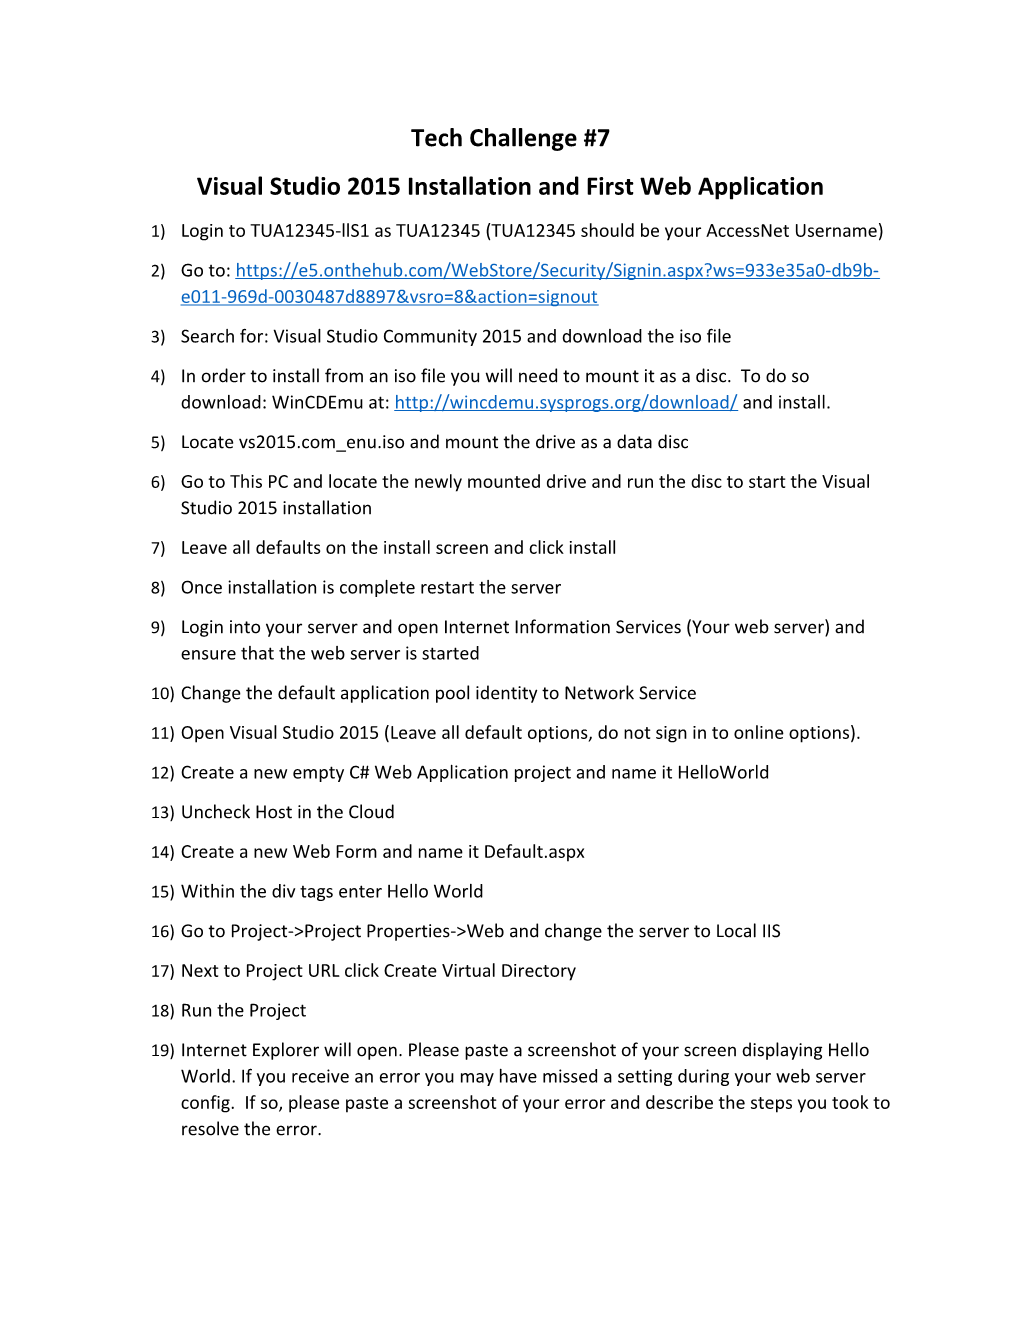 Visual Studio 2015 Installation and First Web Application